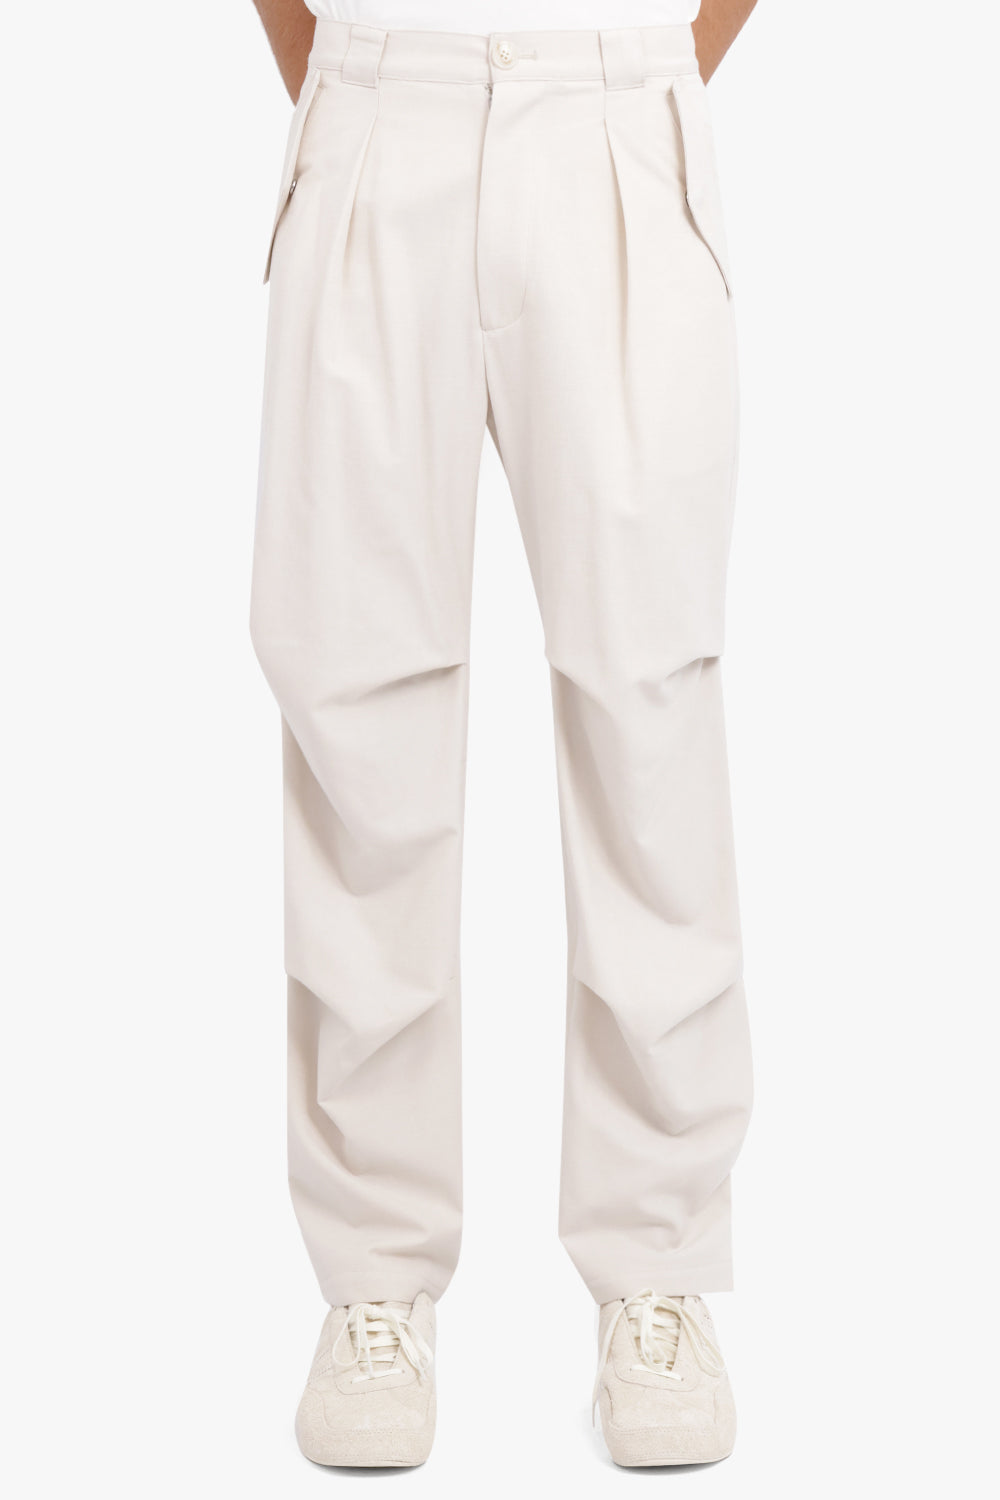 AFTER PRAY RTW TECHNICAL WOOL PANTS | IVORY